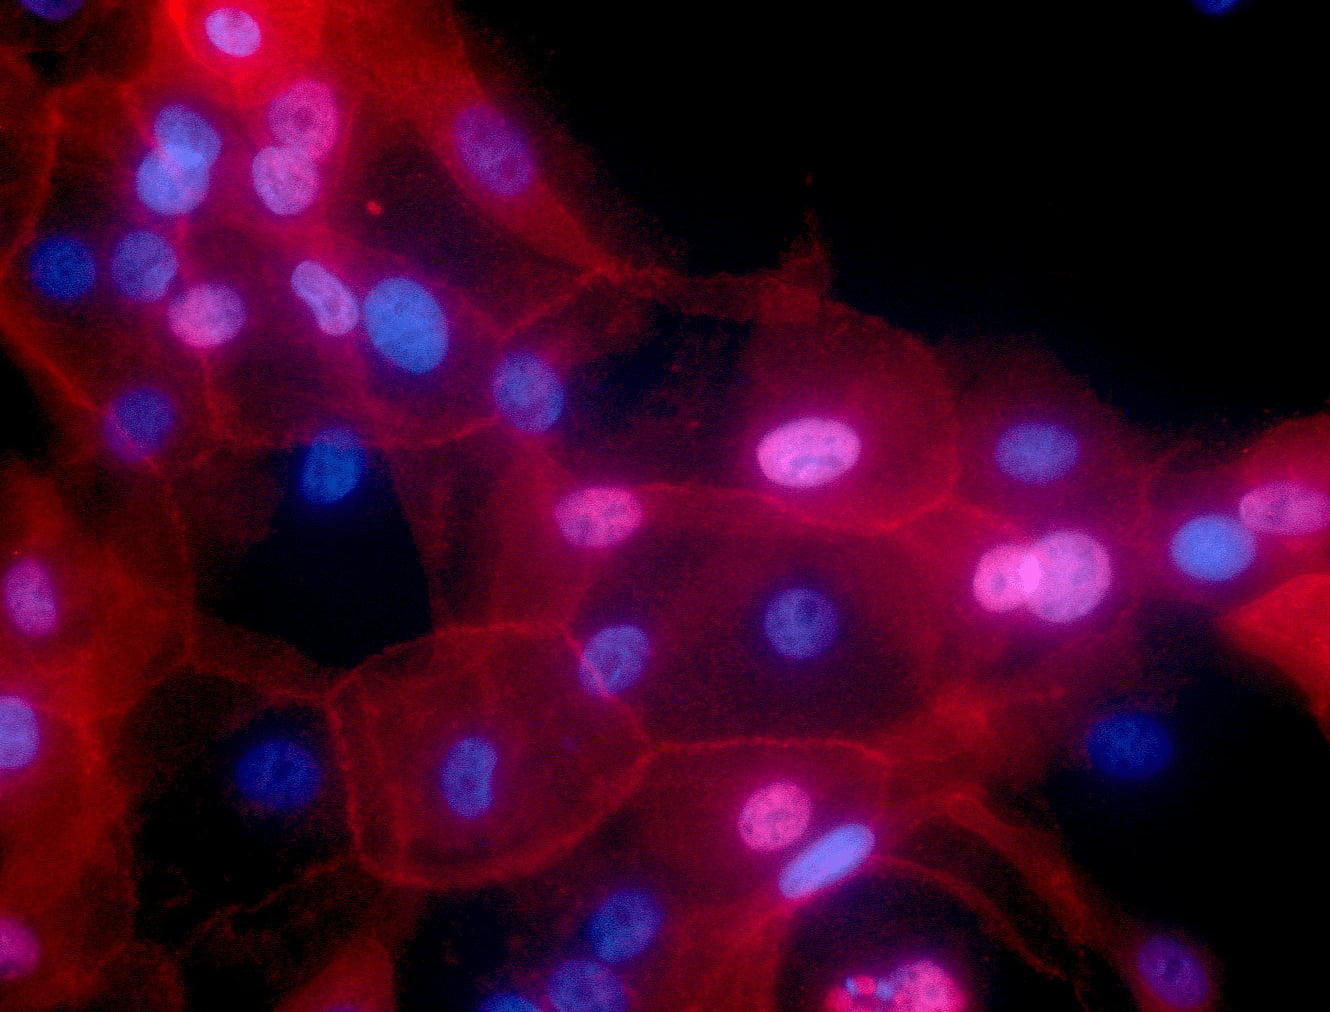 : Image of breast cancer cells. Provided by the National Cancer Institute's Cancer Close Up project.